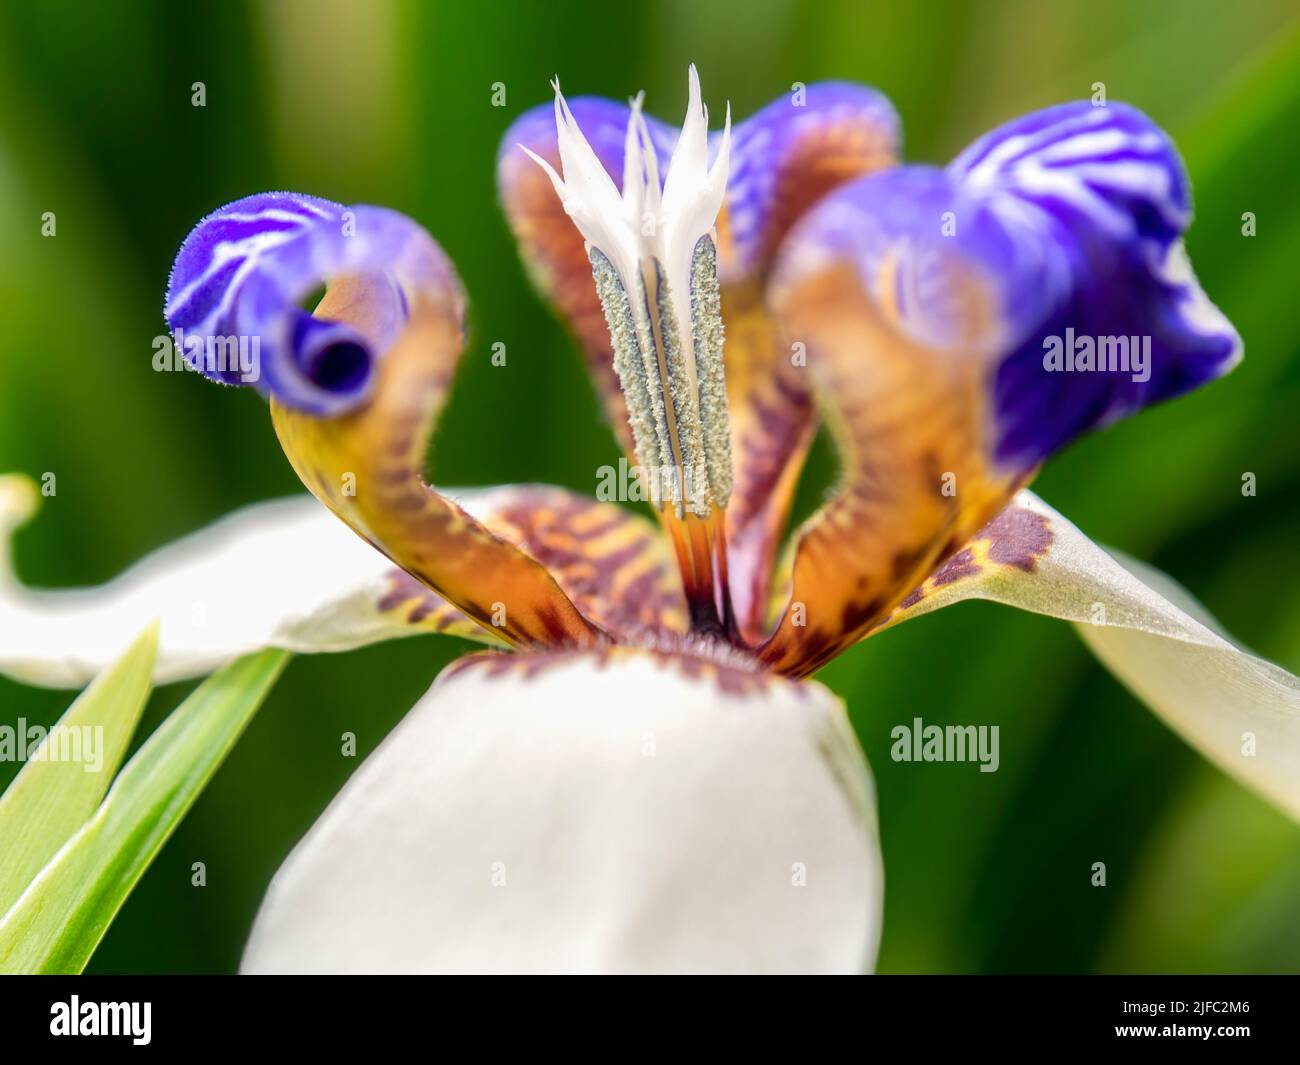 Macro photography of an exotic walking iris flower, captured at a garden near the colonial town of Villa de Leyva in central Colombia. Stock Photo